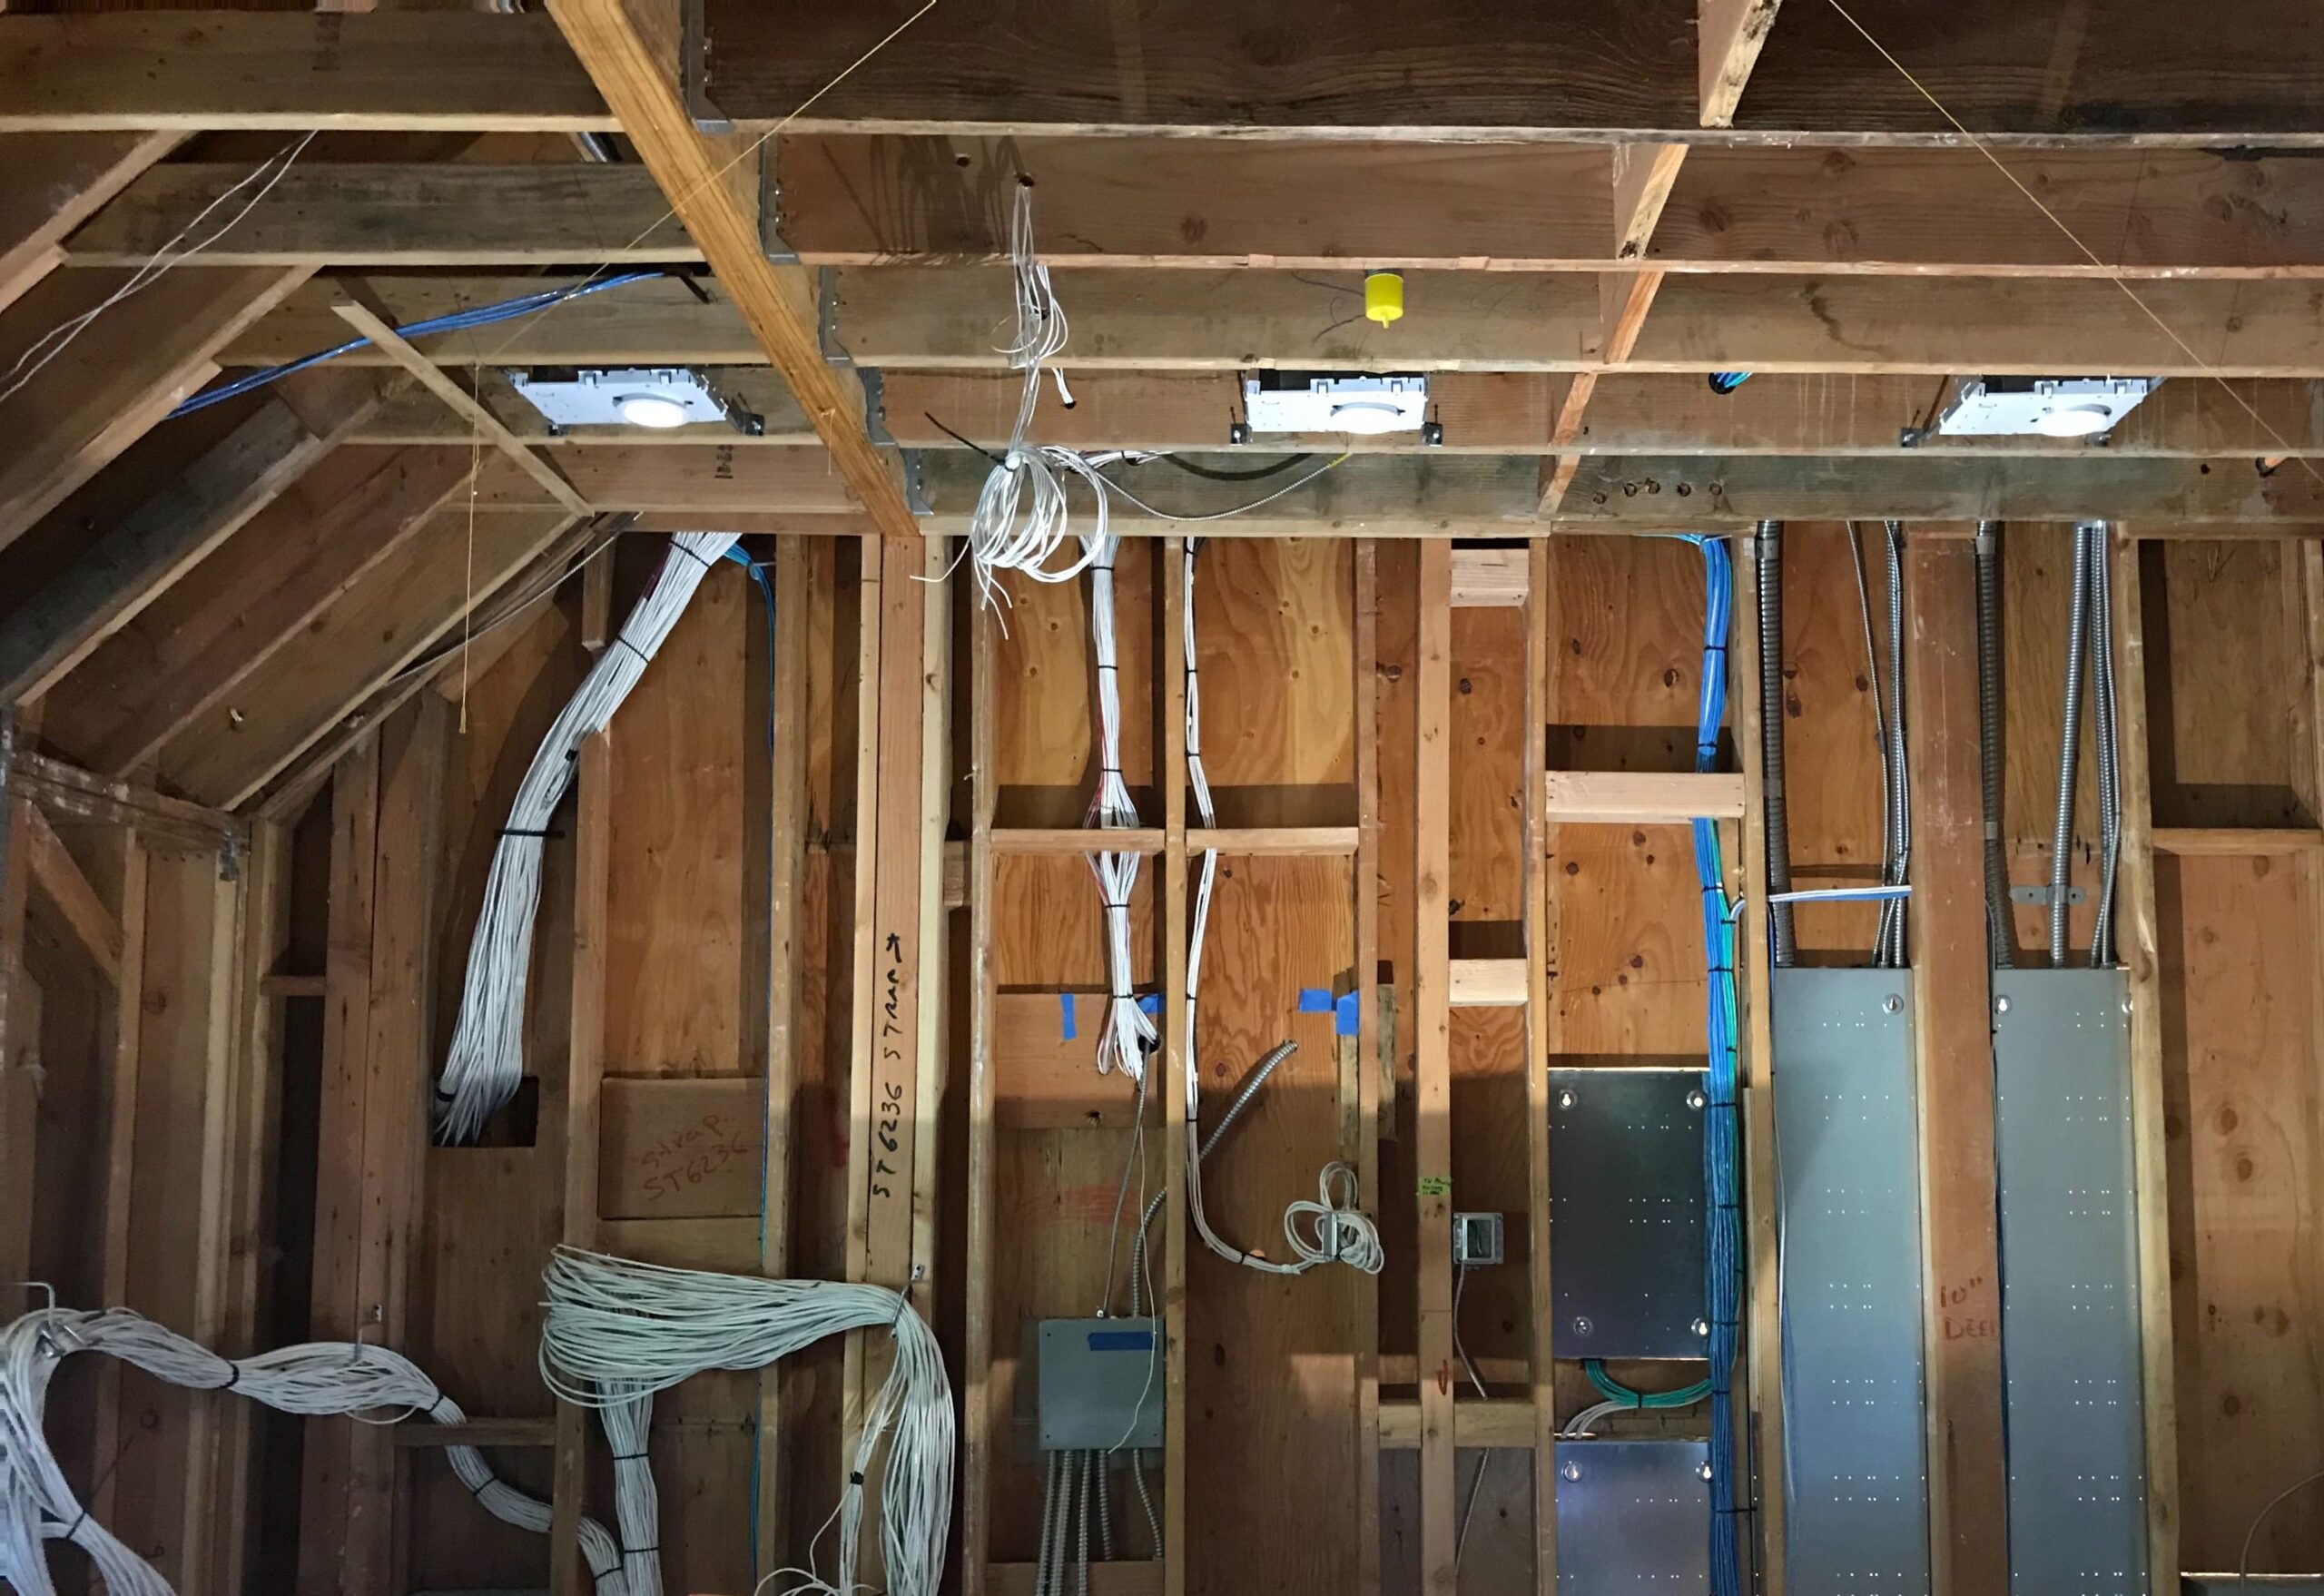 Prewire My House With Conduit or Without